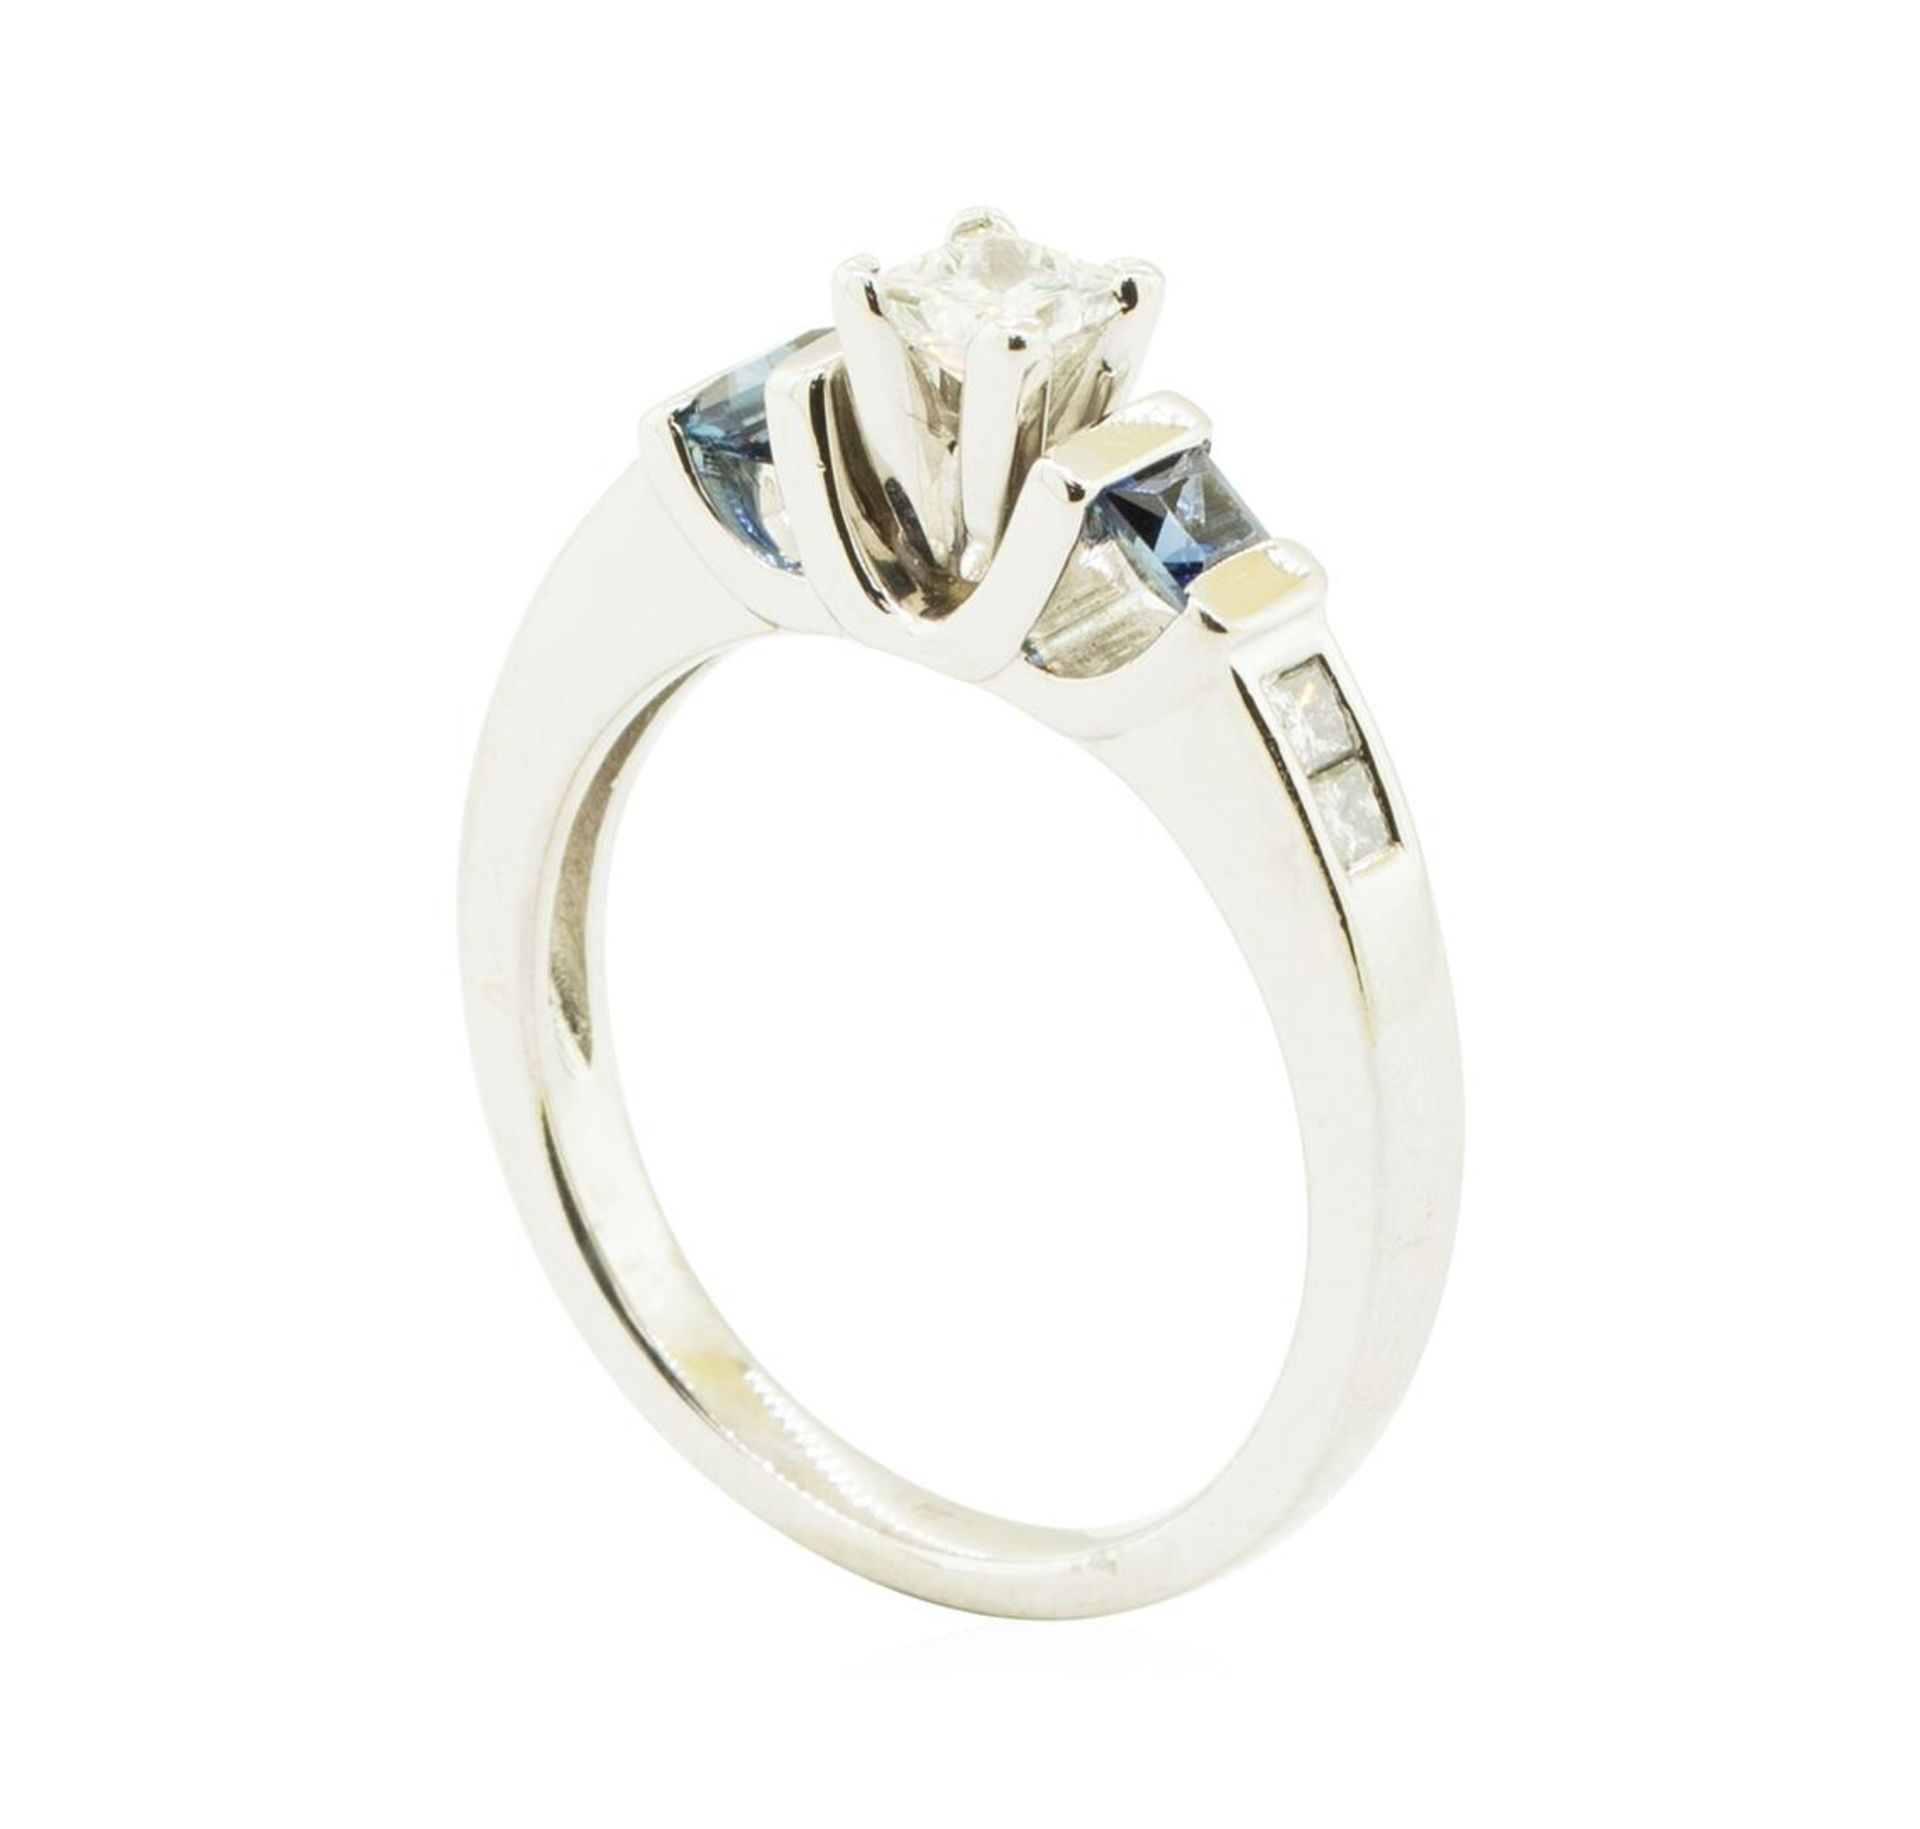 0.60 ctw Diamond and Sapphire Ring - 14KT White Gold - Image 4 of 4